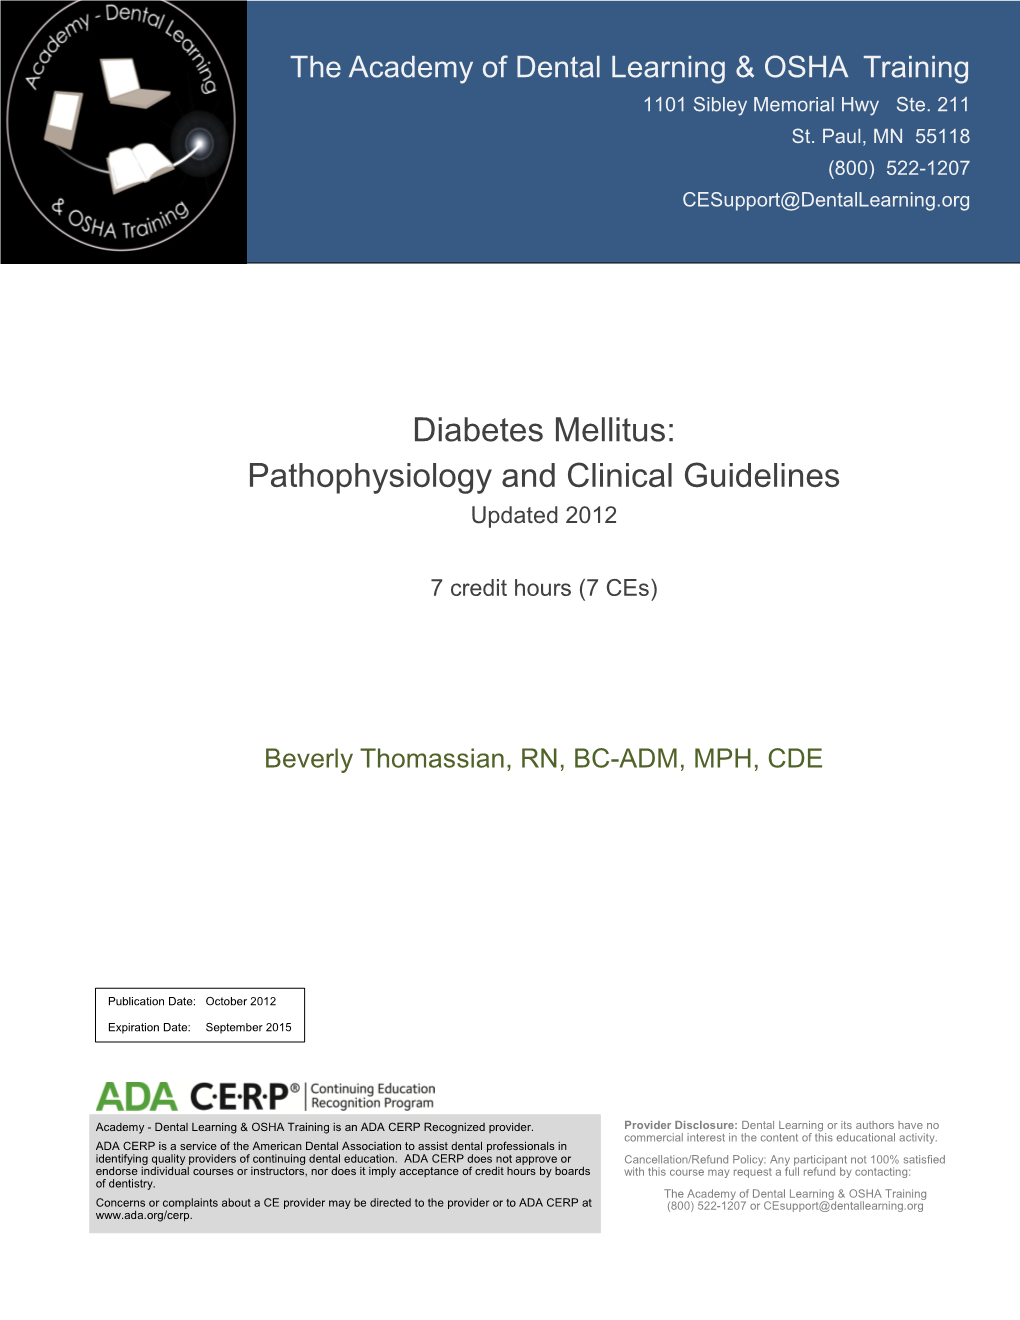 Diabetes Mellitus: Pathophysiology and Clinical Guidelines Updated 2012